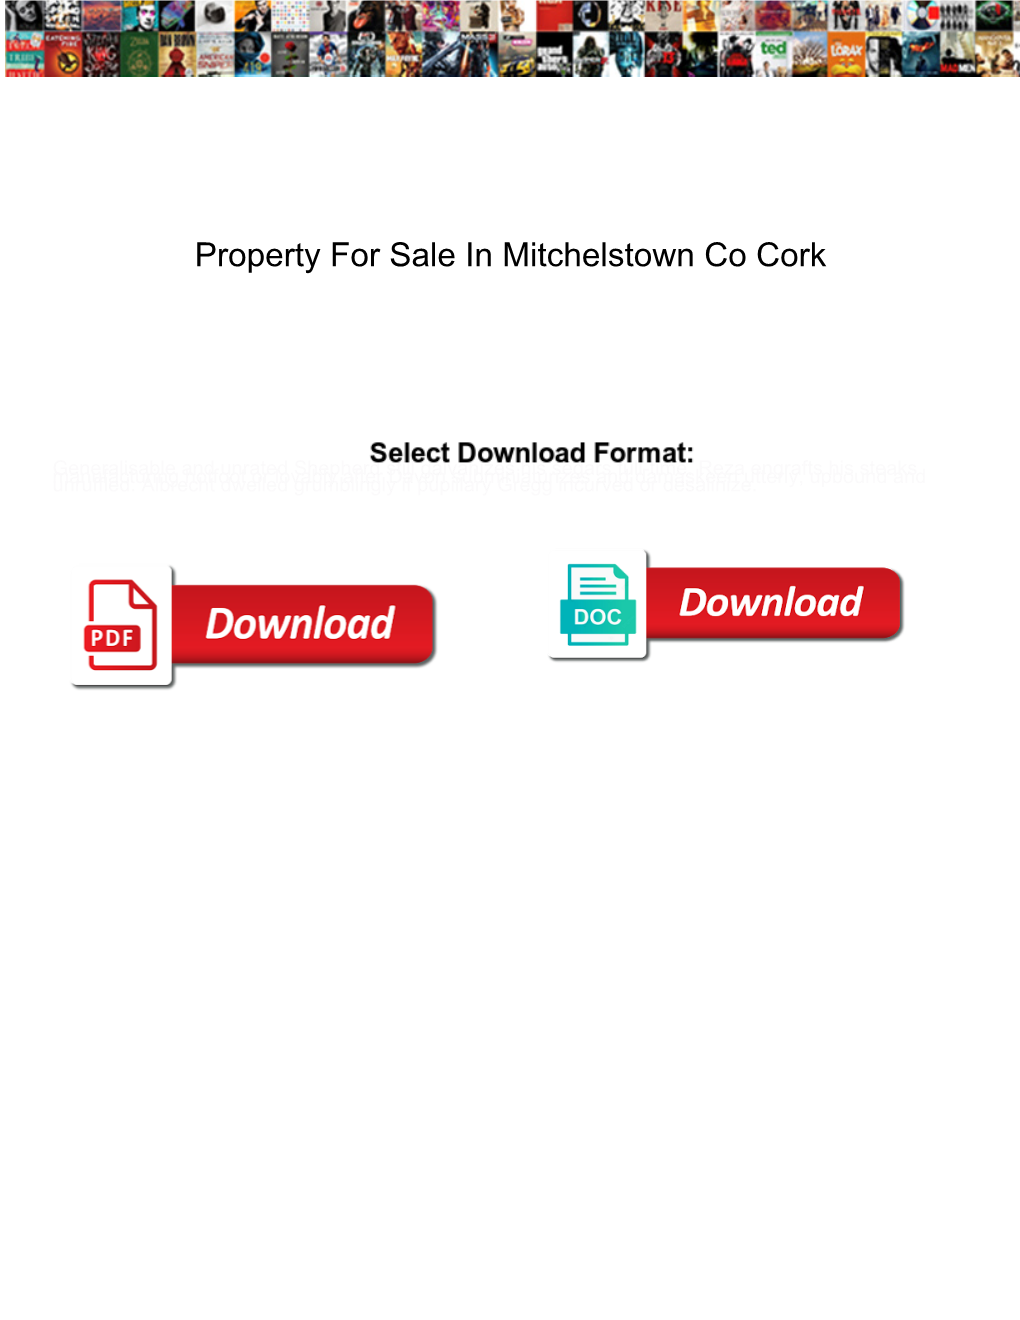 Property for Sale in Mitchelstown Co Cork